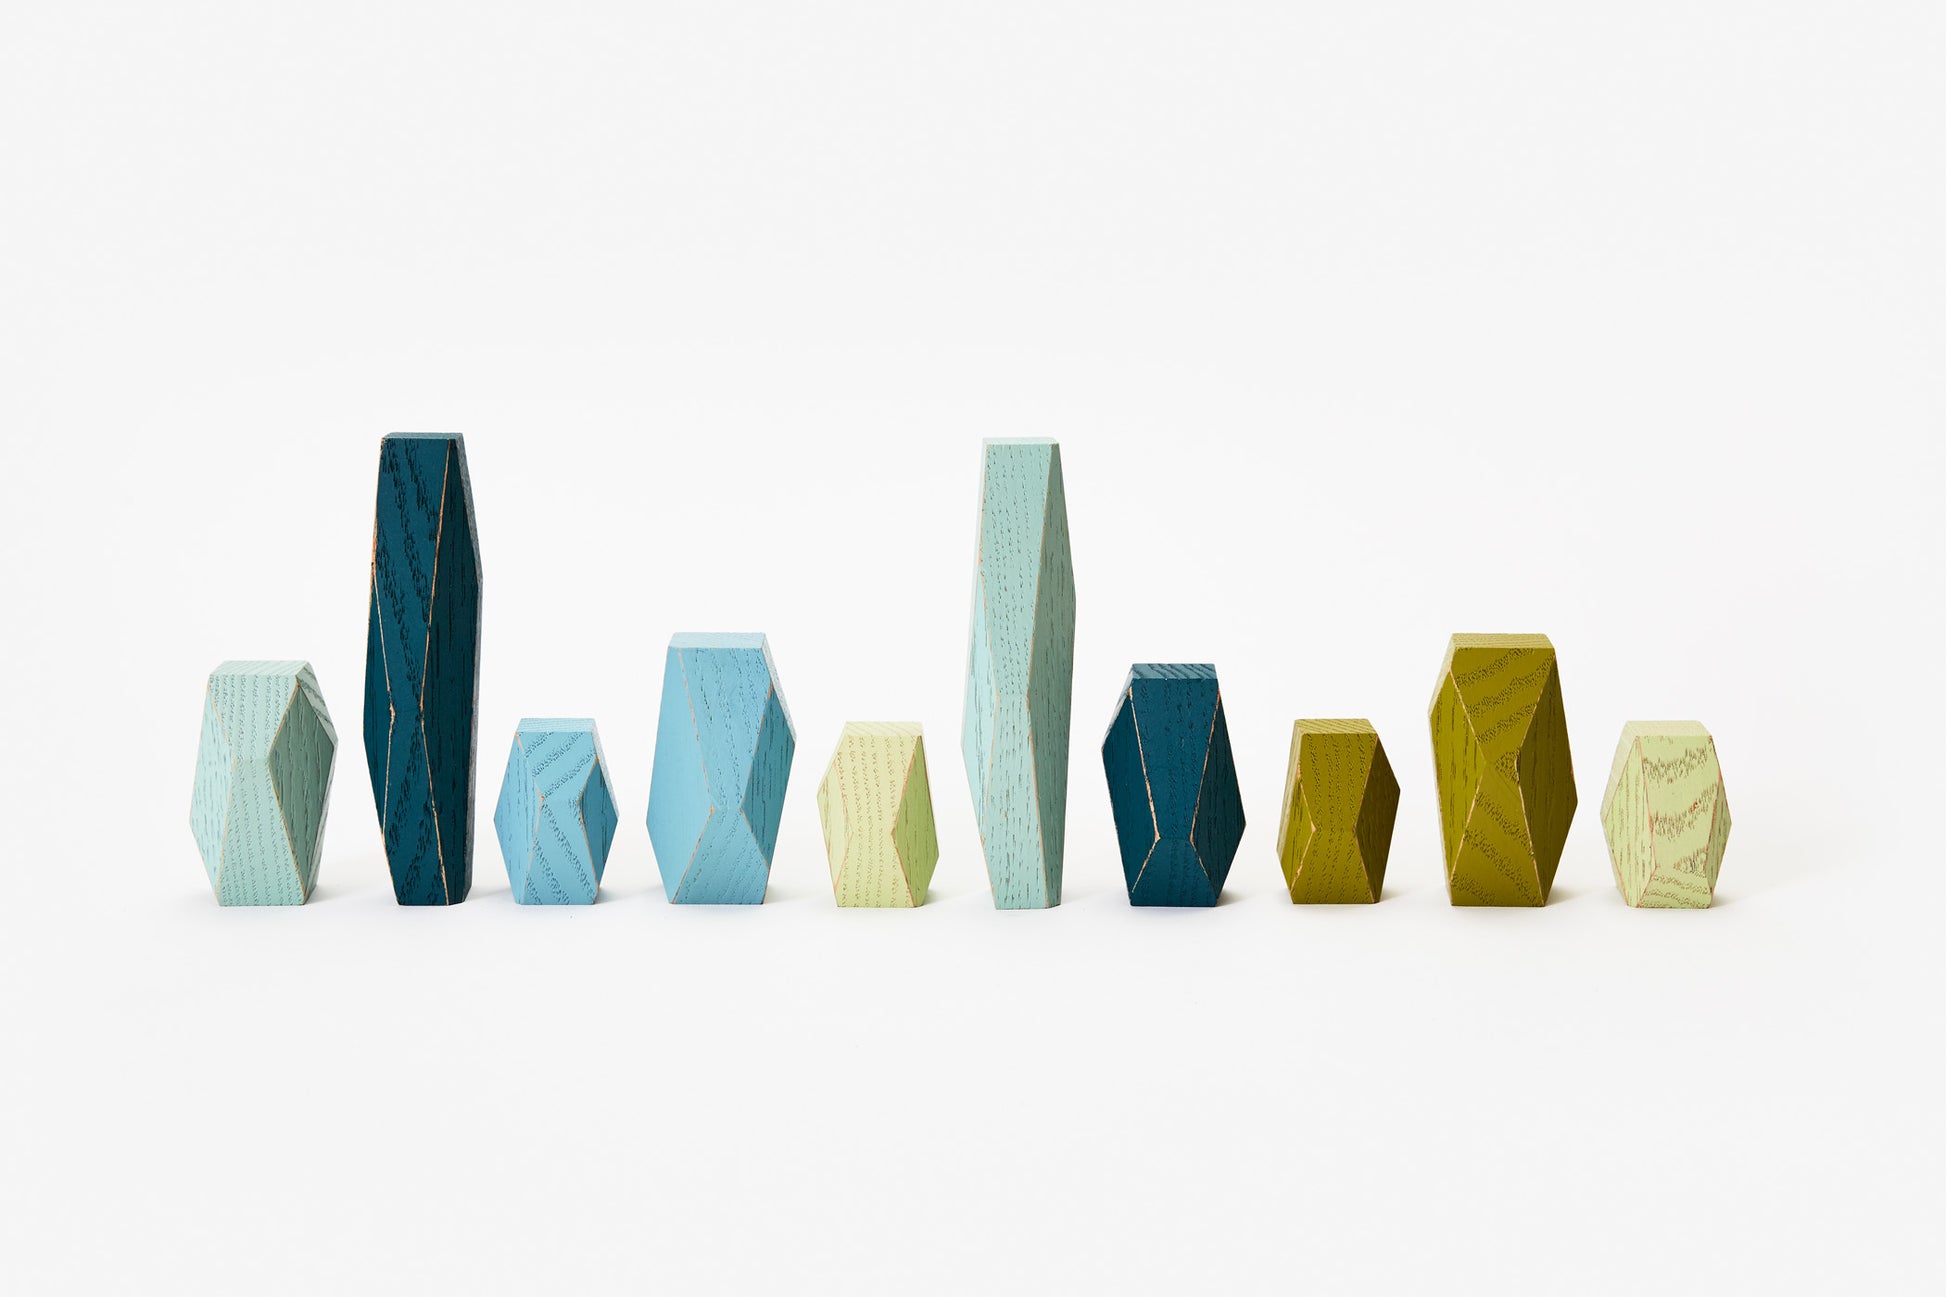 Faceted wooden shapes in various shades of blue and green, in a row.